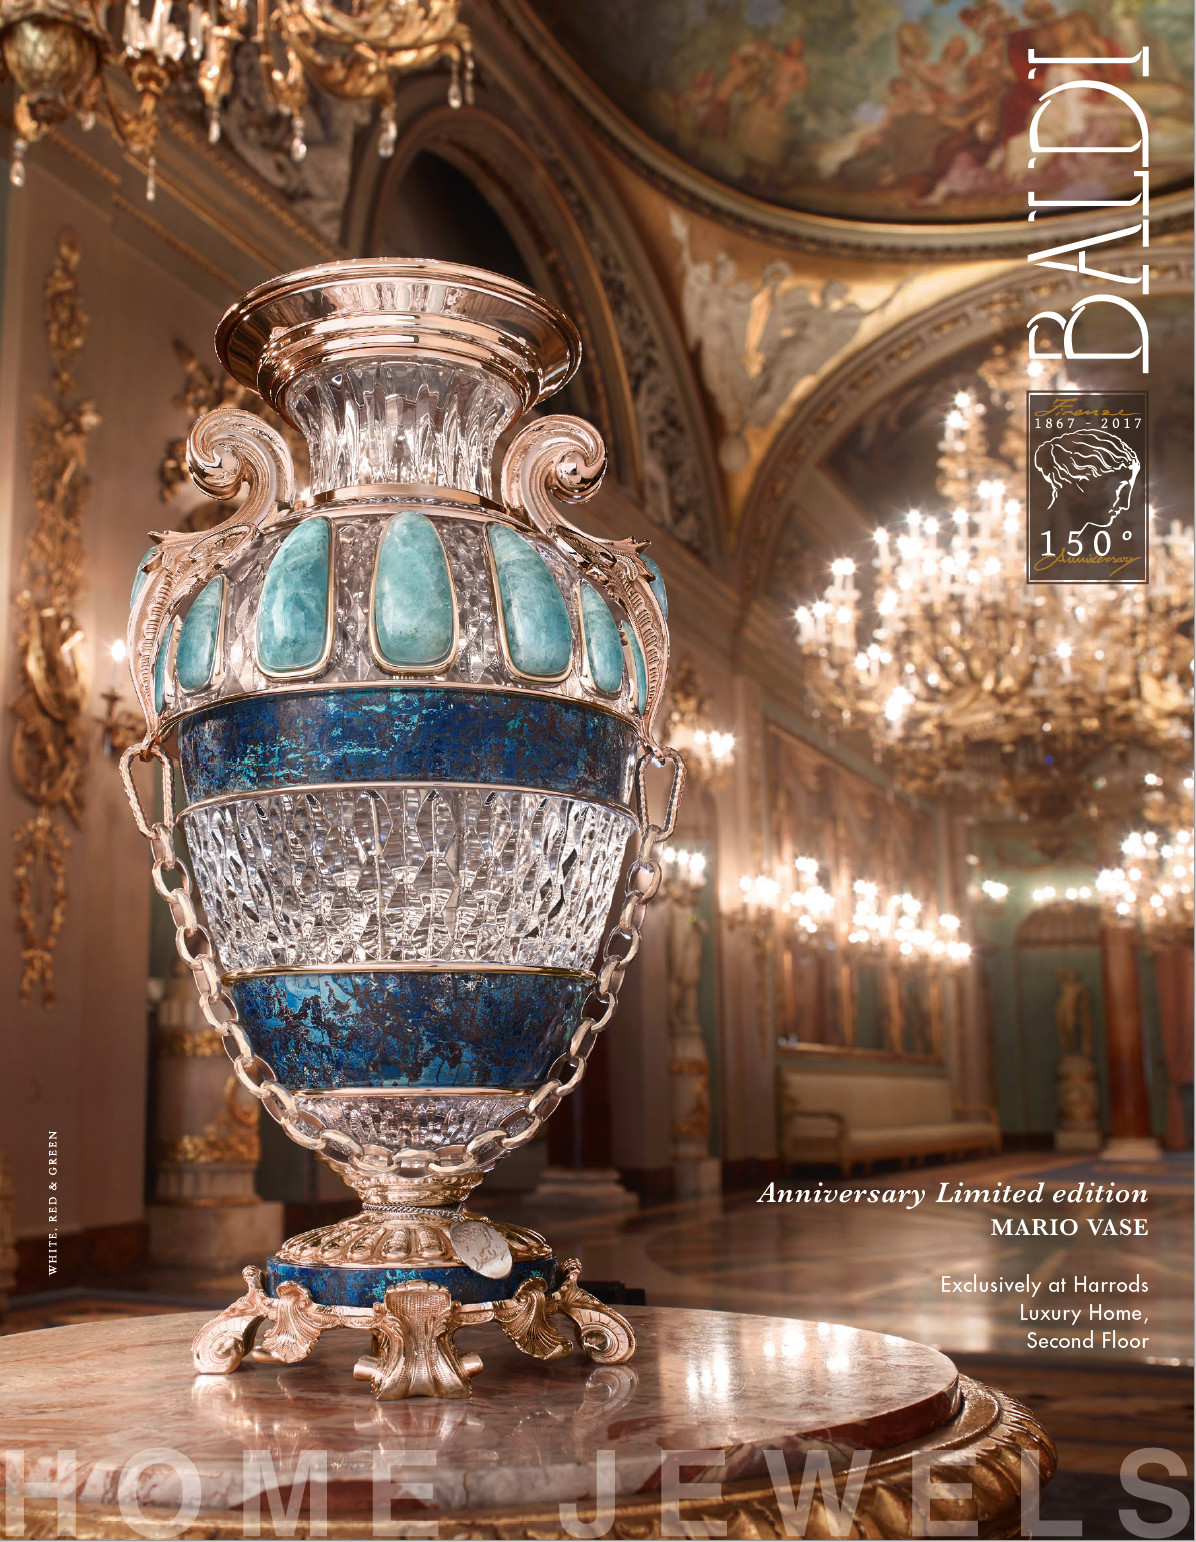 29 Lovable Teal Vases and Bowls 2024 free download teal vases and bowls of baldi home jewels mario vase firenze page harrods magazine with regard to baldi home jewels mario vase firenze page harrods magazine